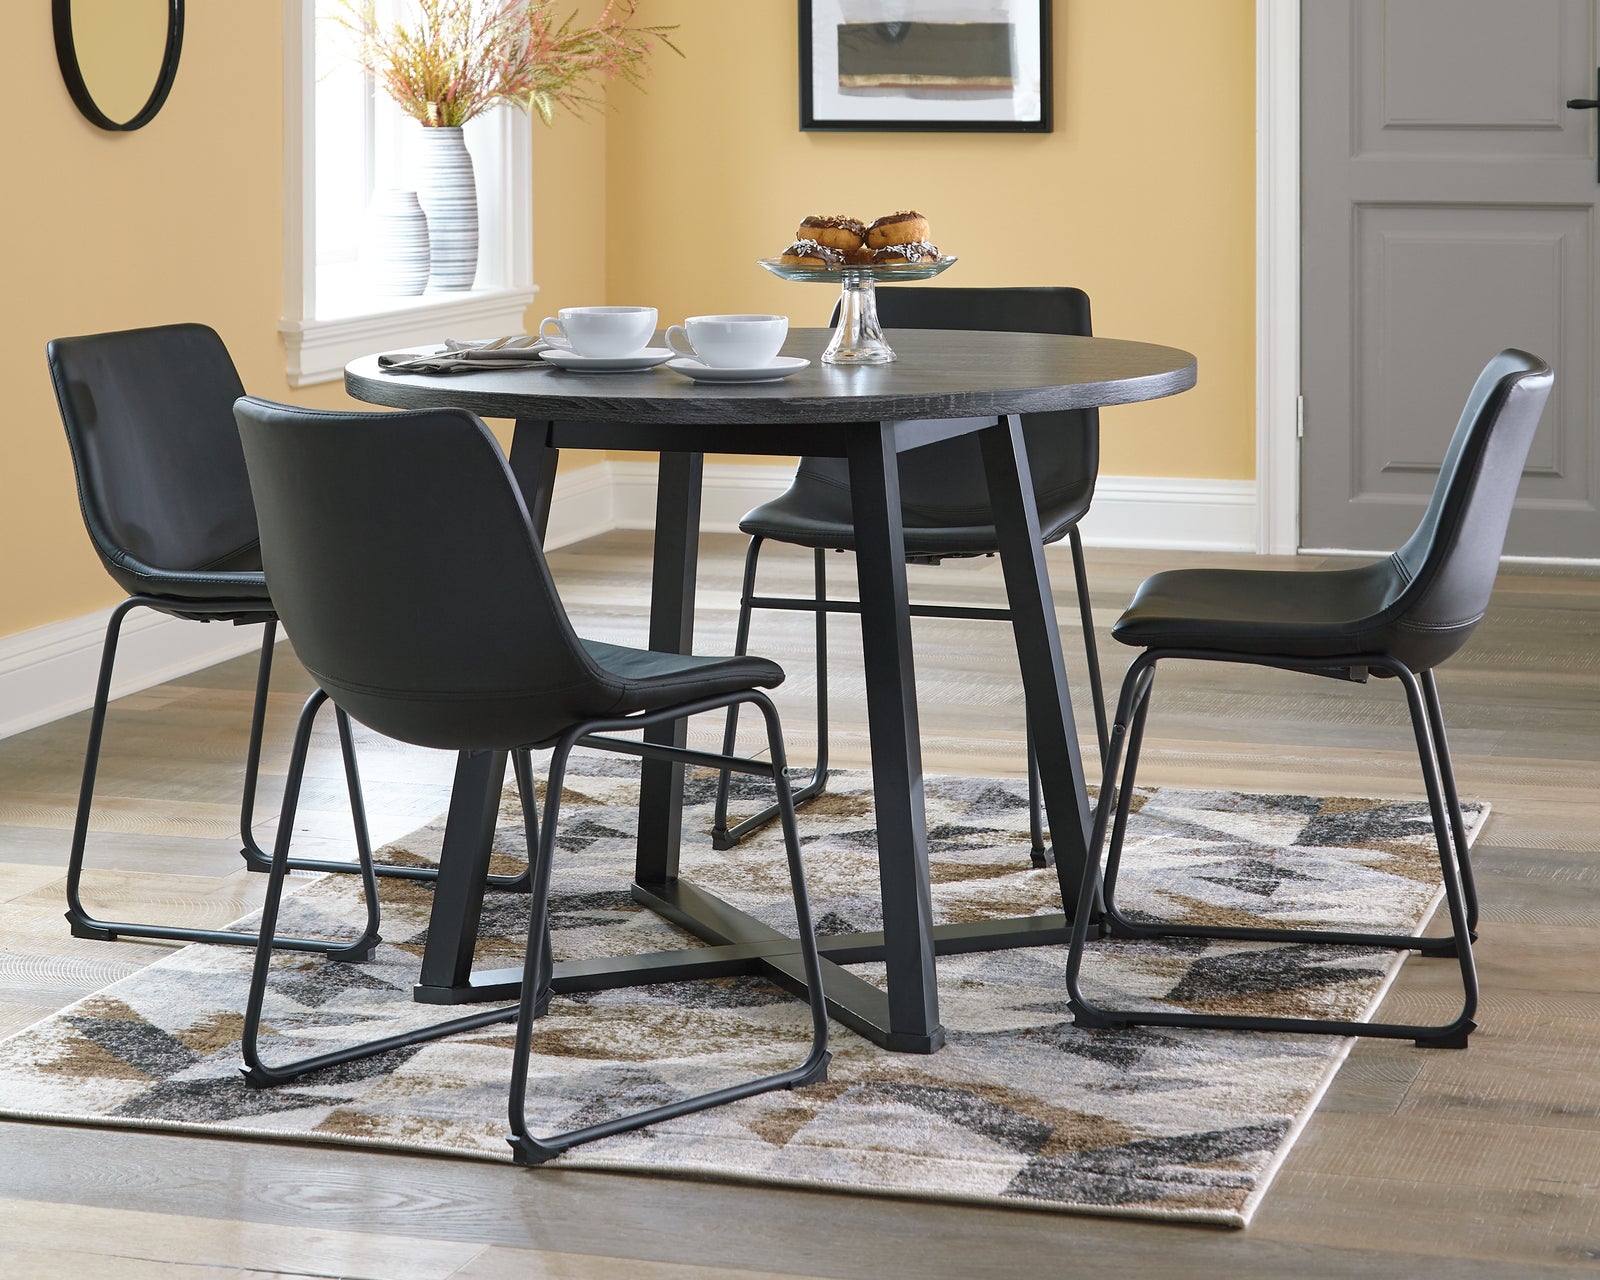 Centiar Black Dining Table And 4 Chairs